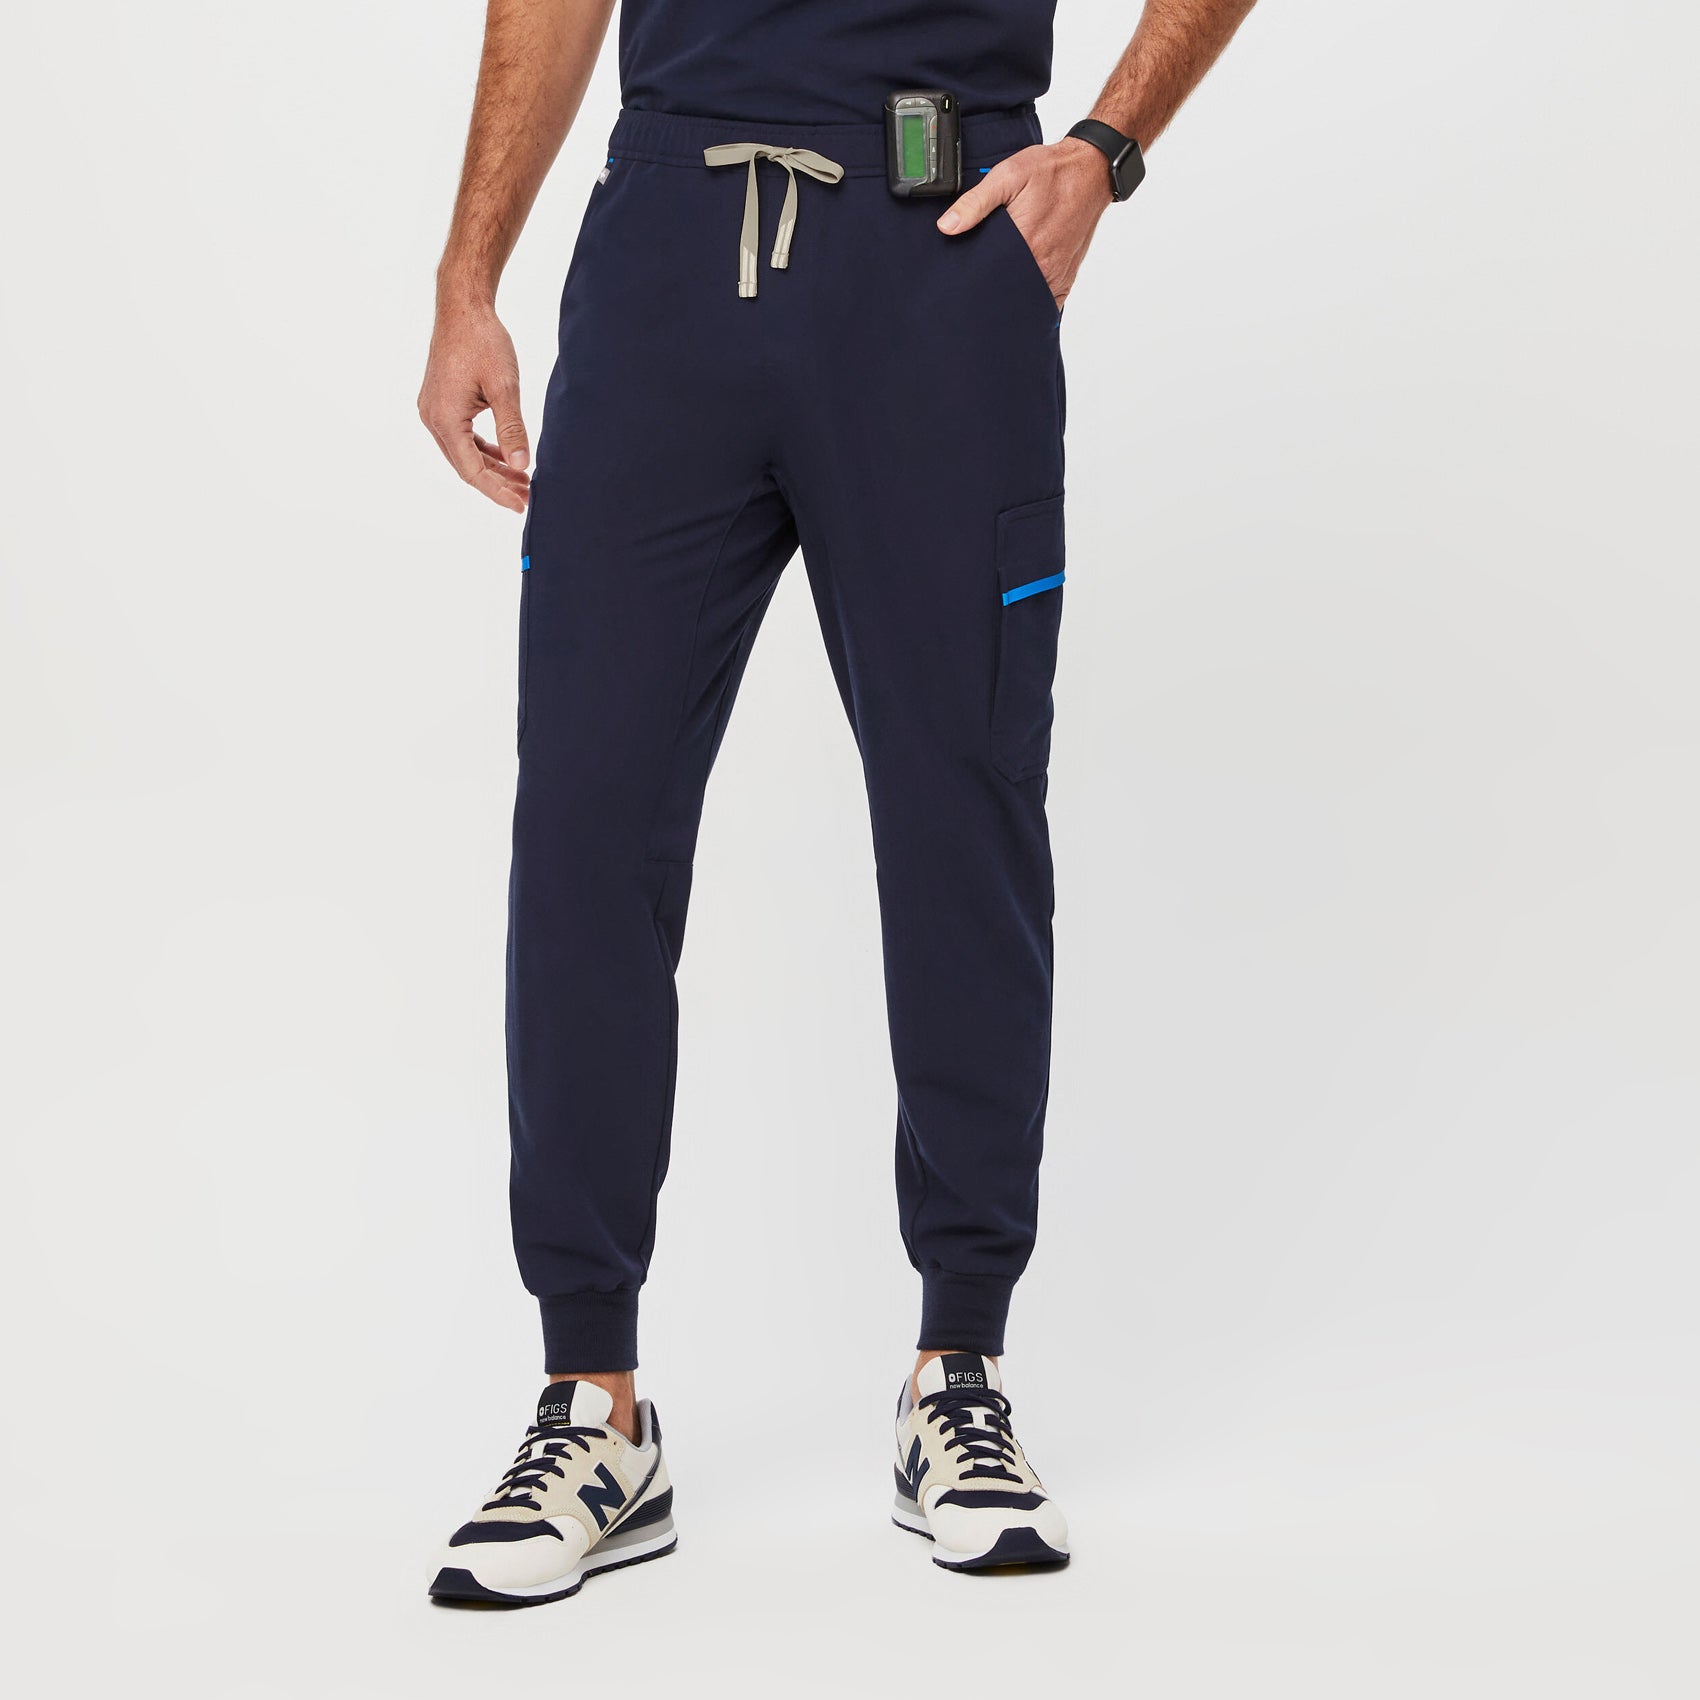 UPDATED* FIGS SCRUB REVIEW  comparing Regular and Tall sized joggers 